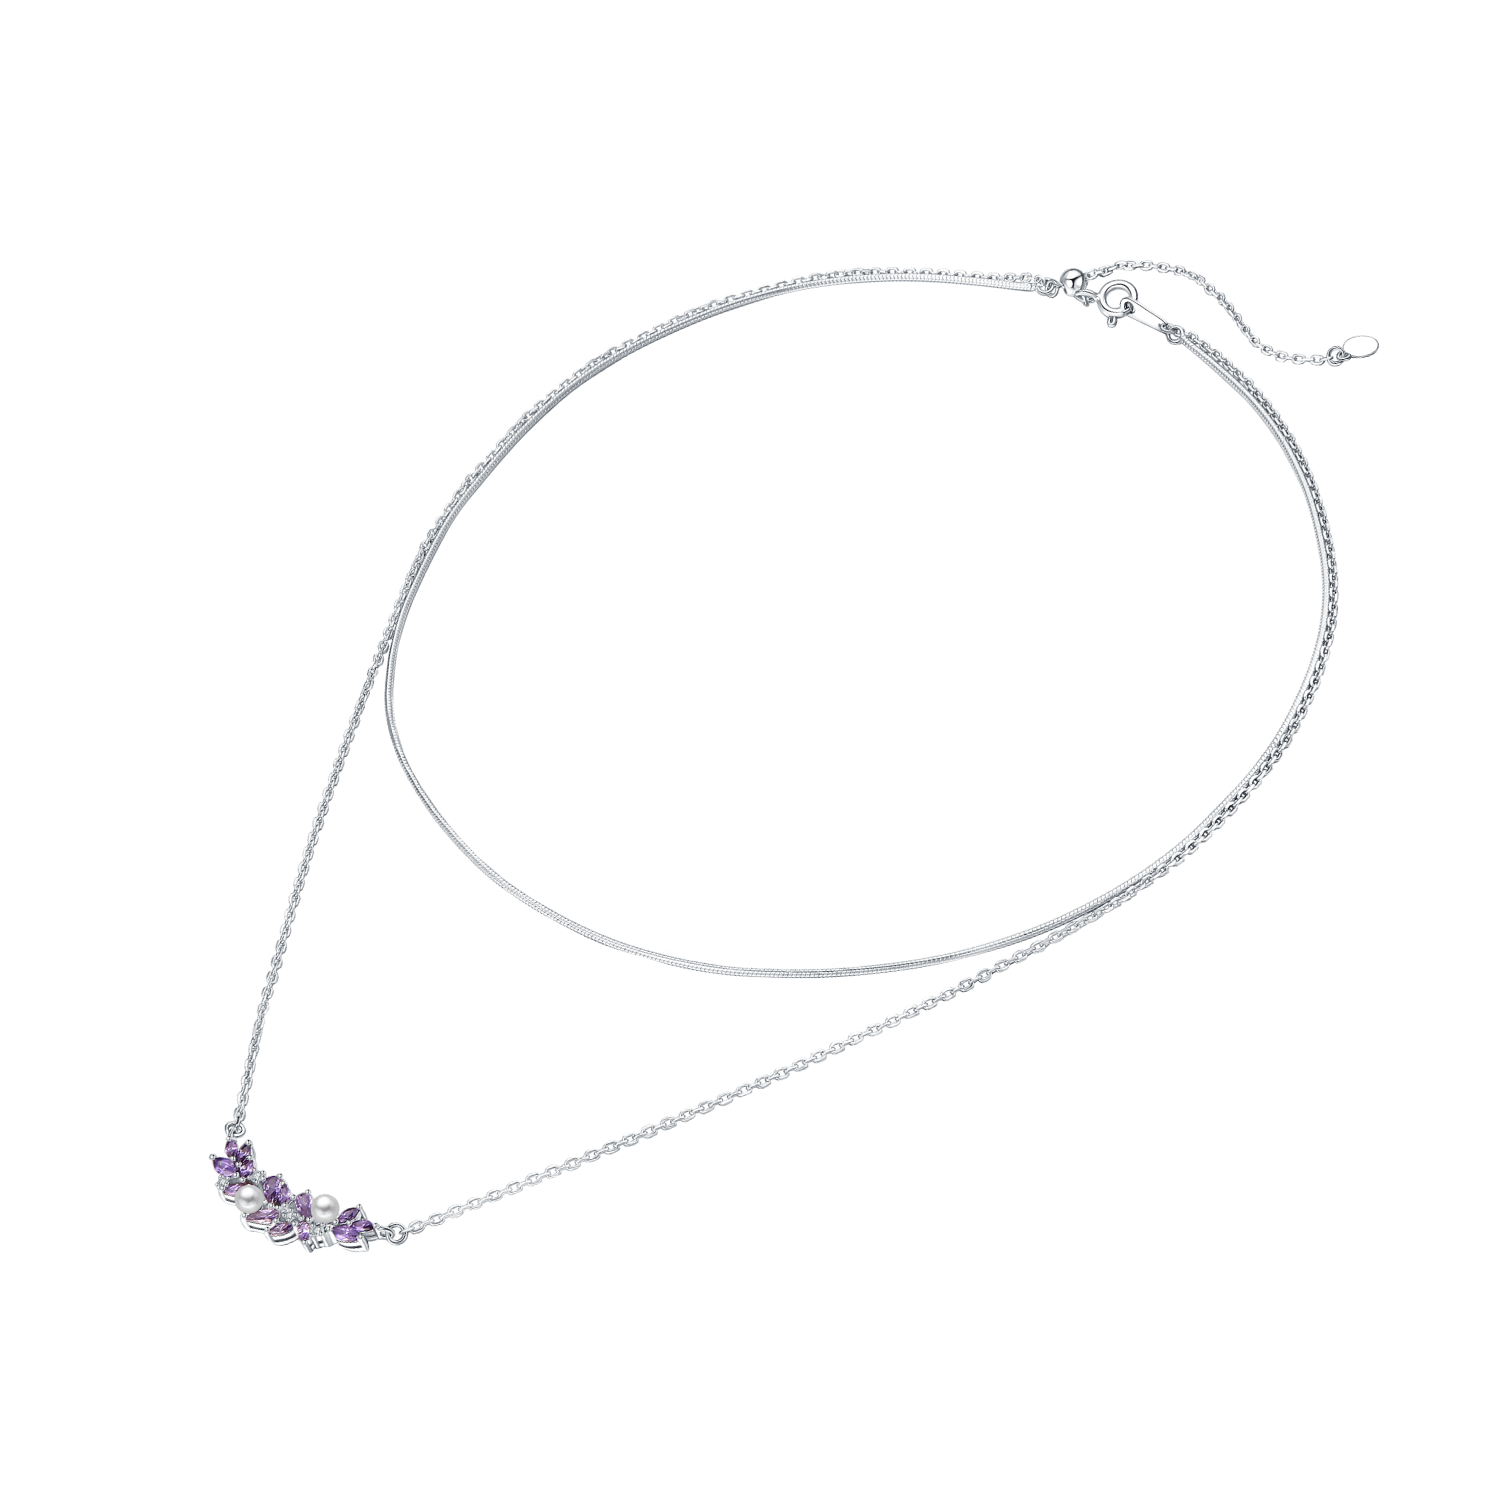 Lavender Layered Necklace